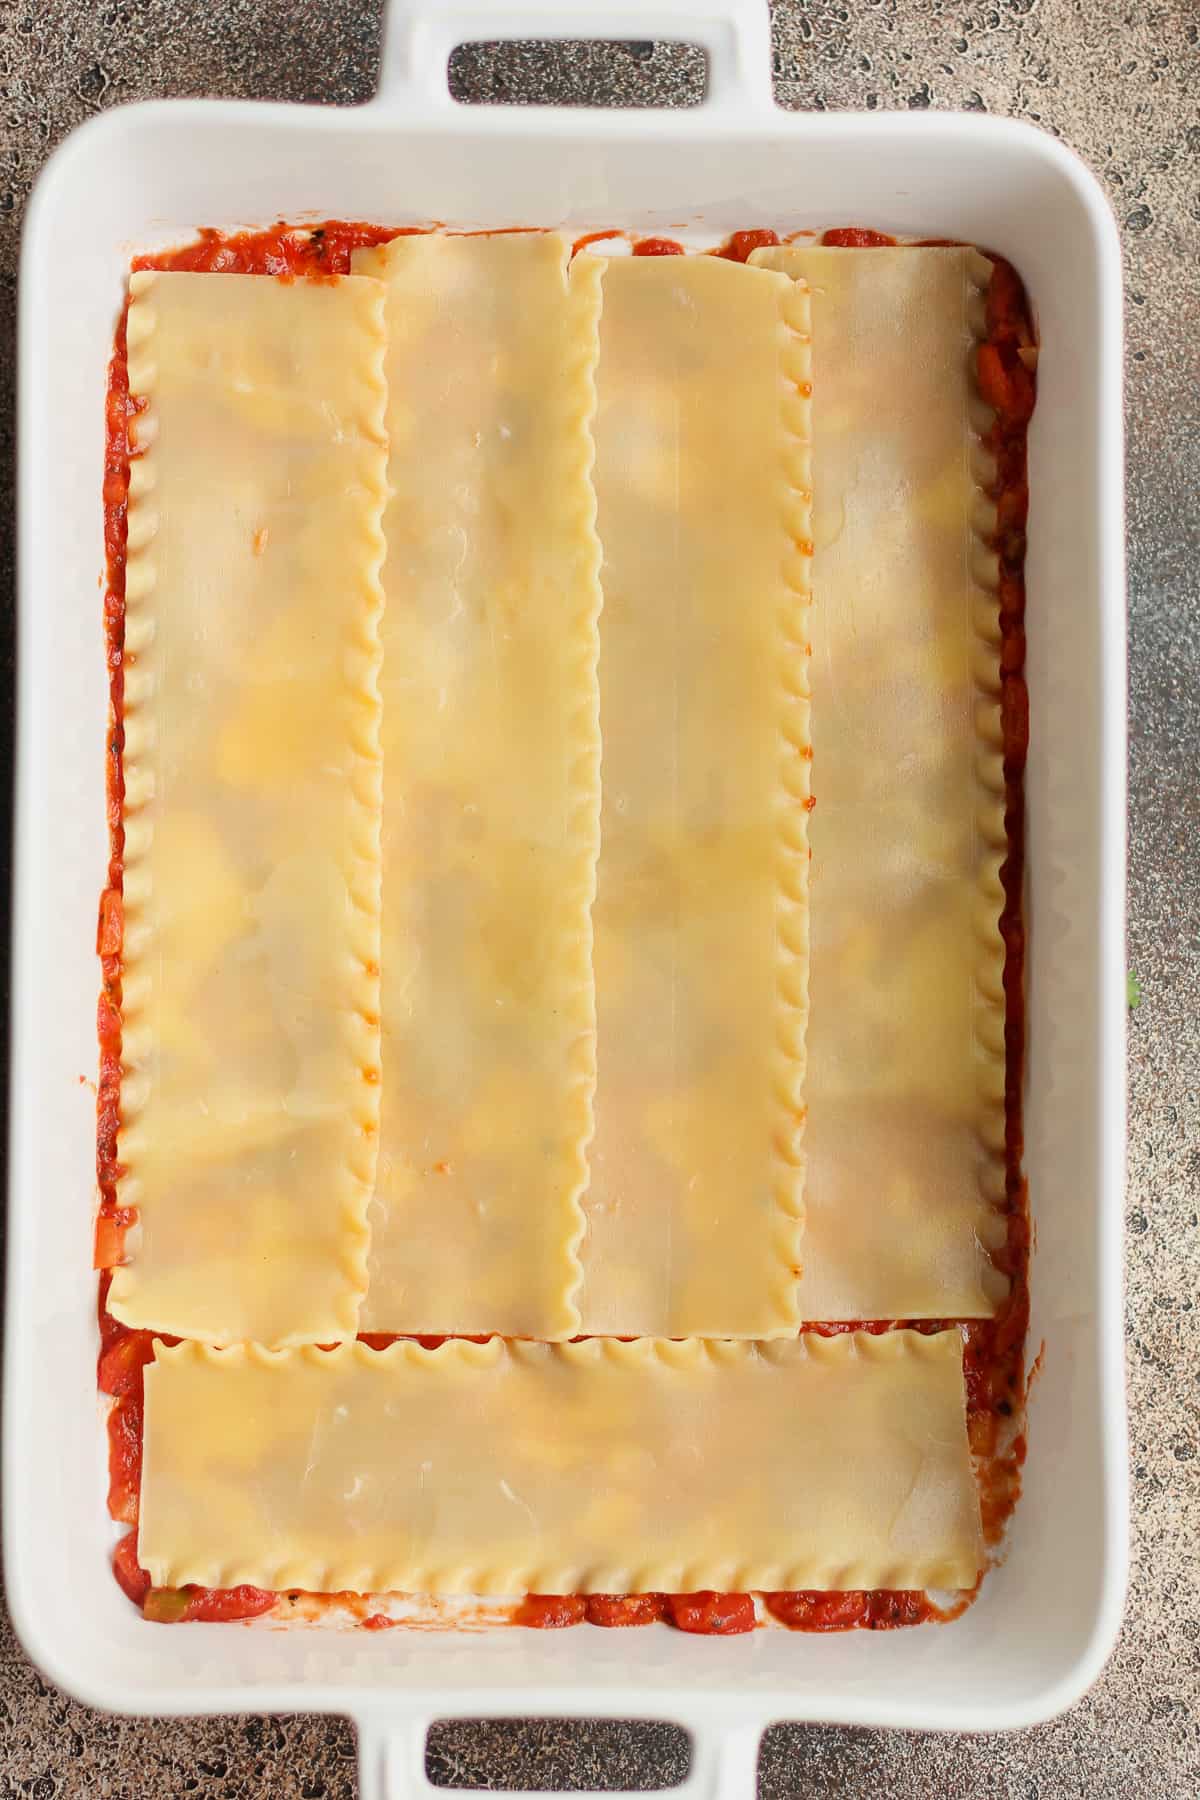 The casserole with the lasagna noodles on top.